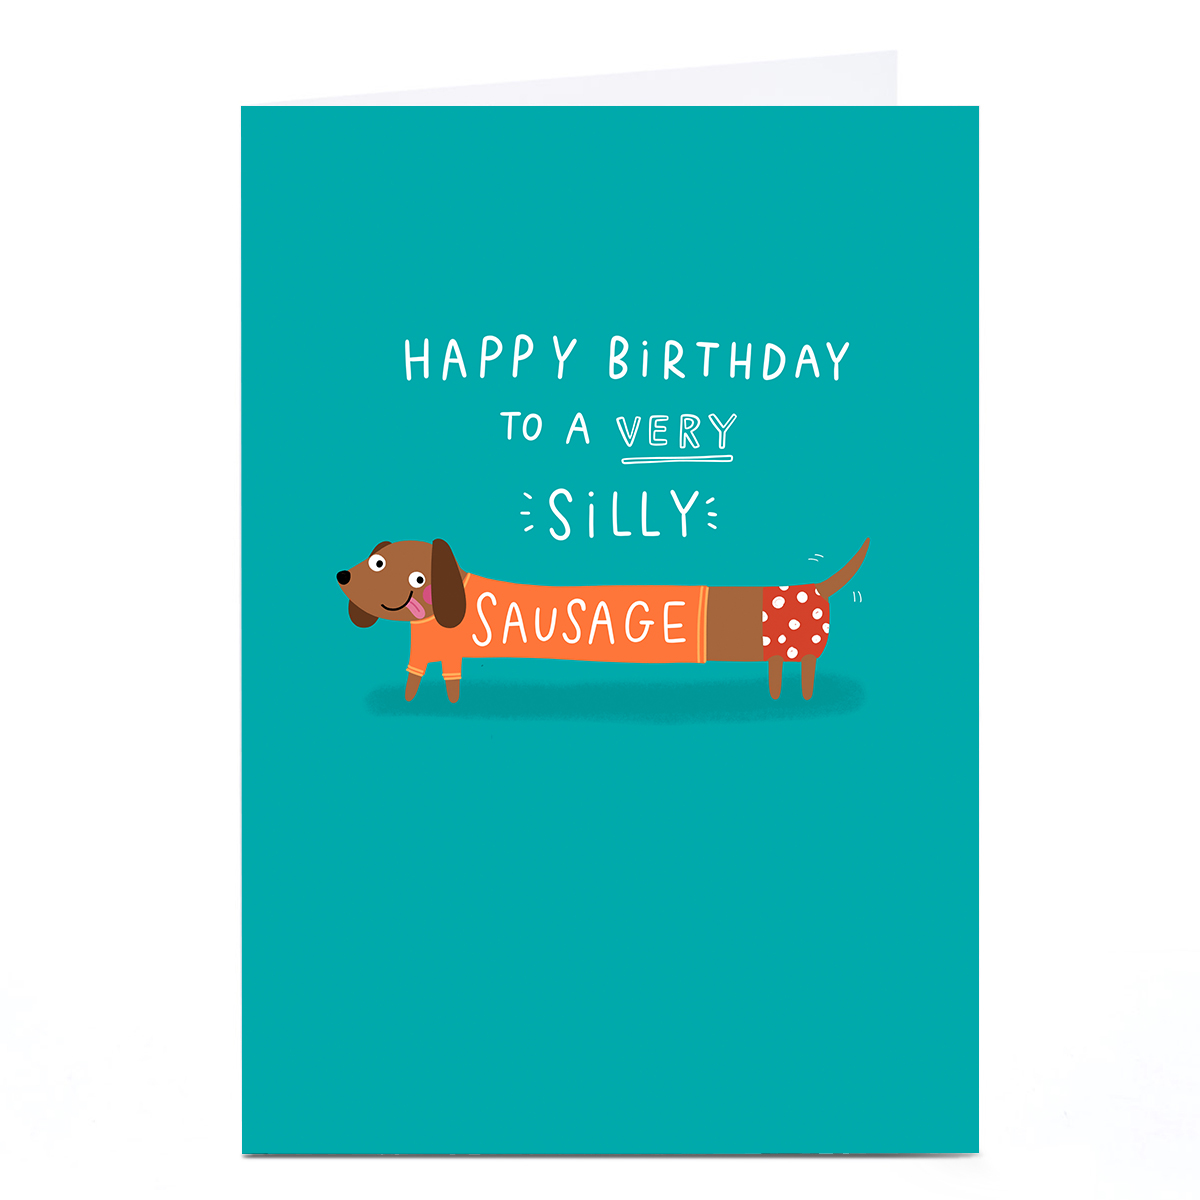 Personalised Jess Moorhouse Birthday Card - Silly Sausage